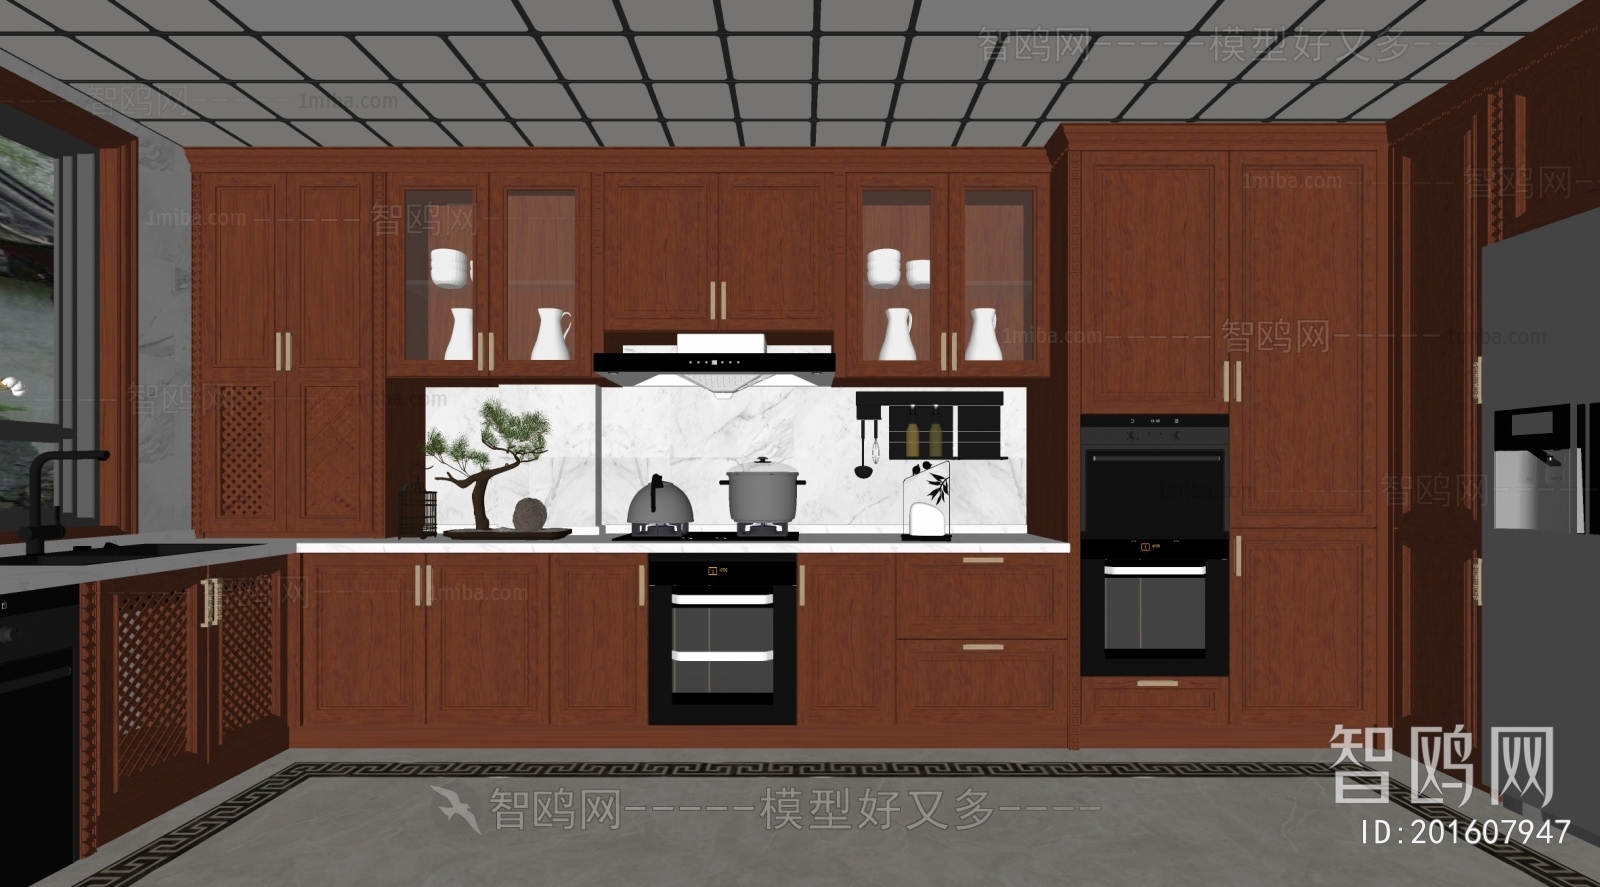 Chinese Style The Kitchen